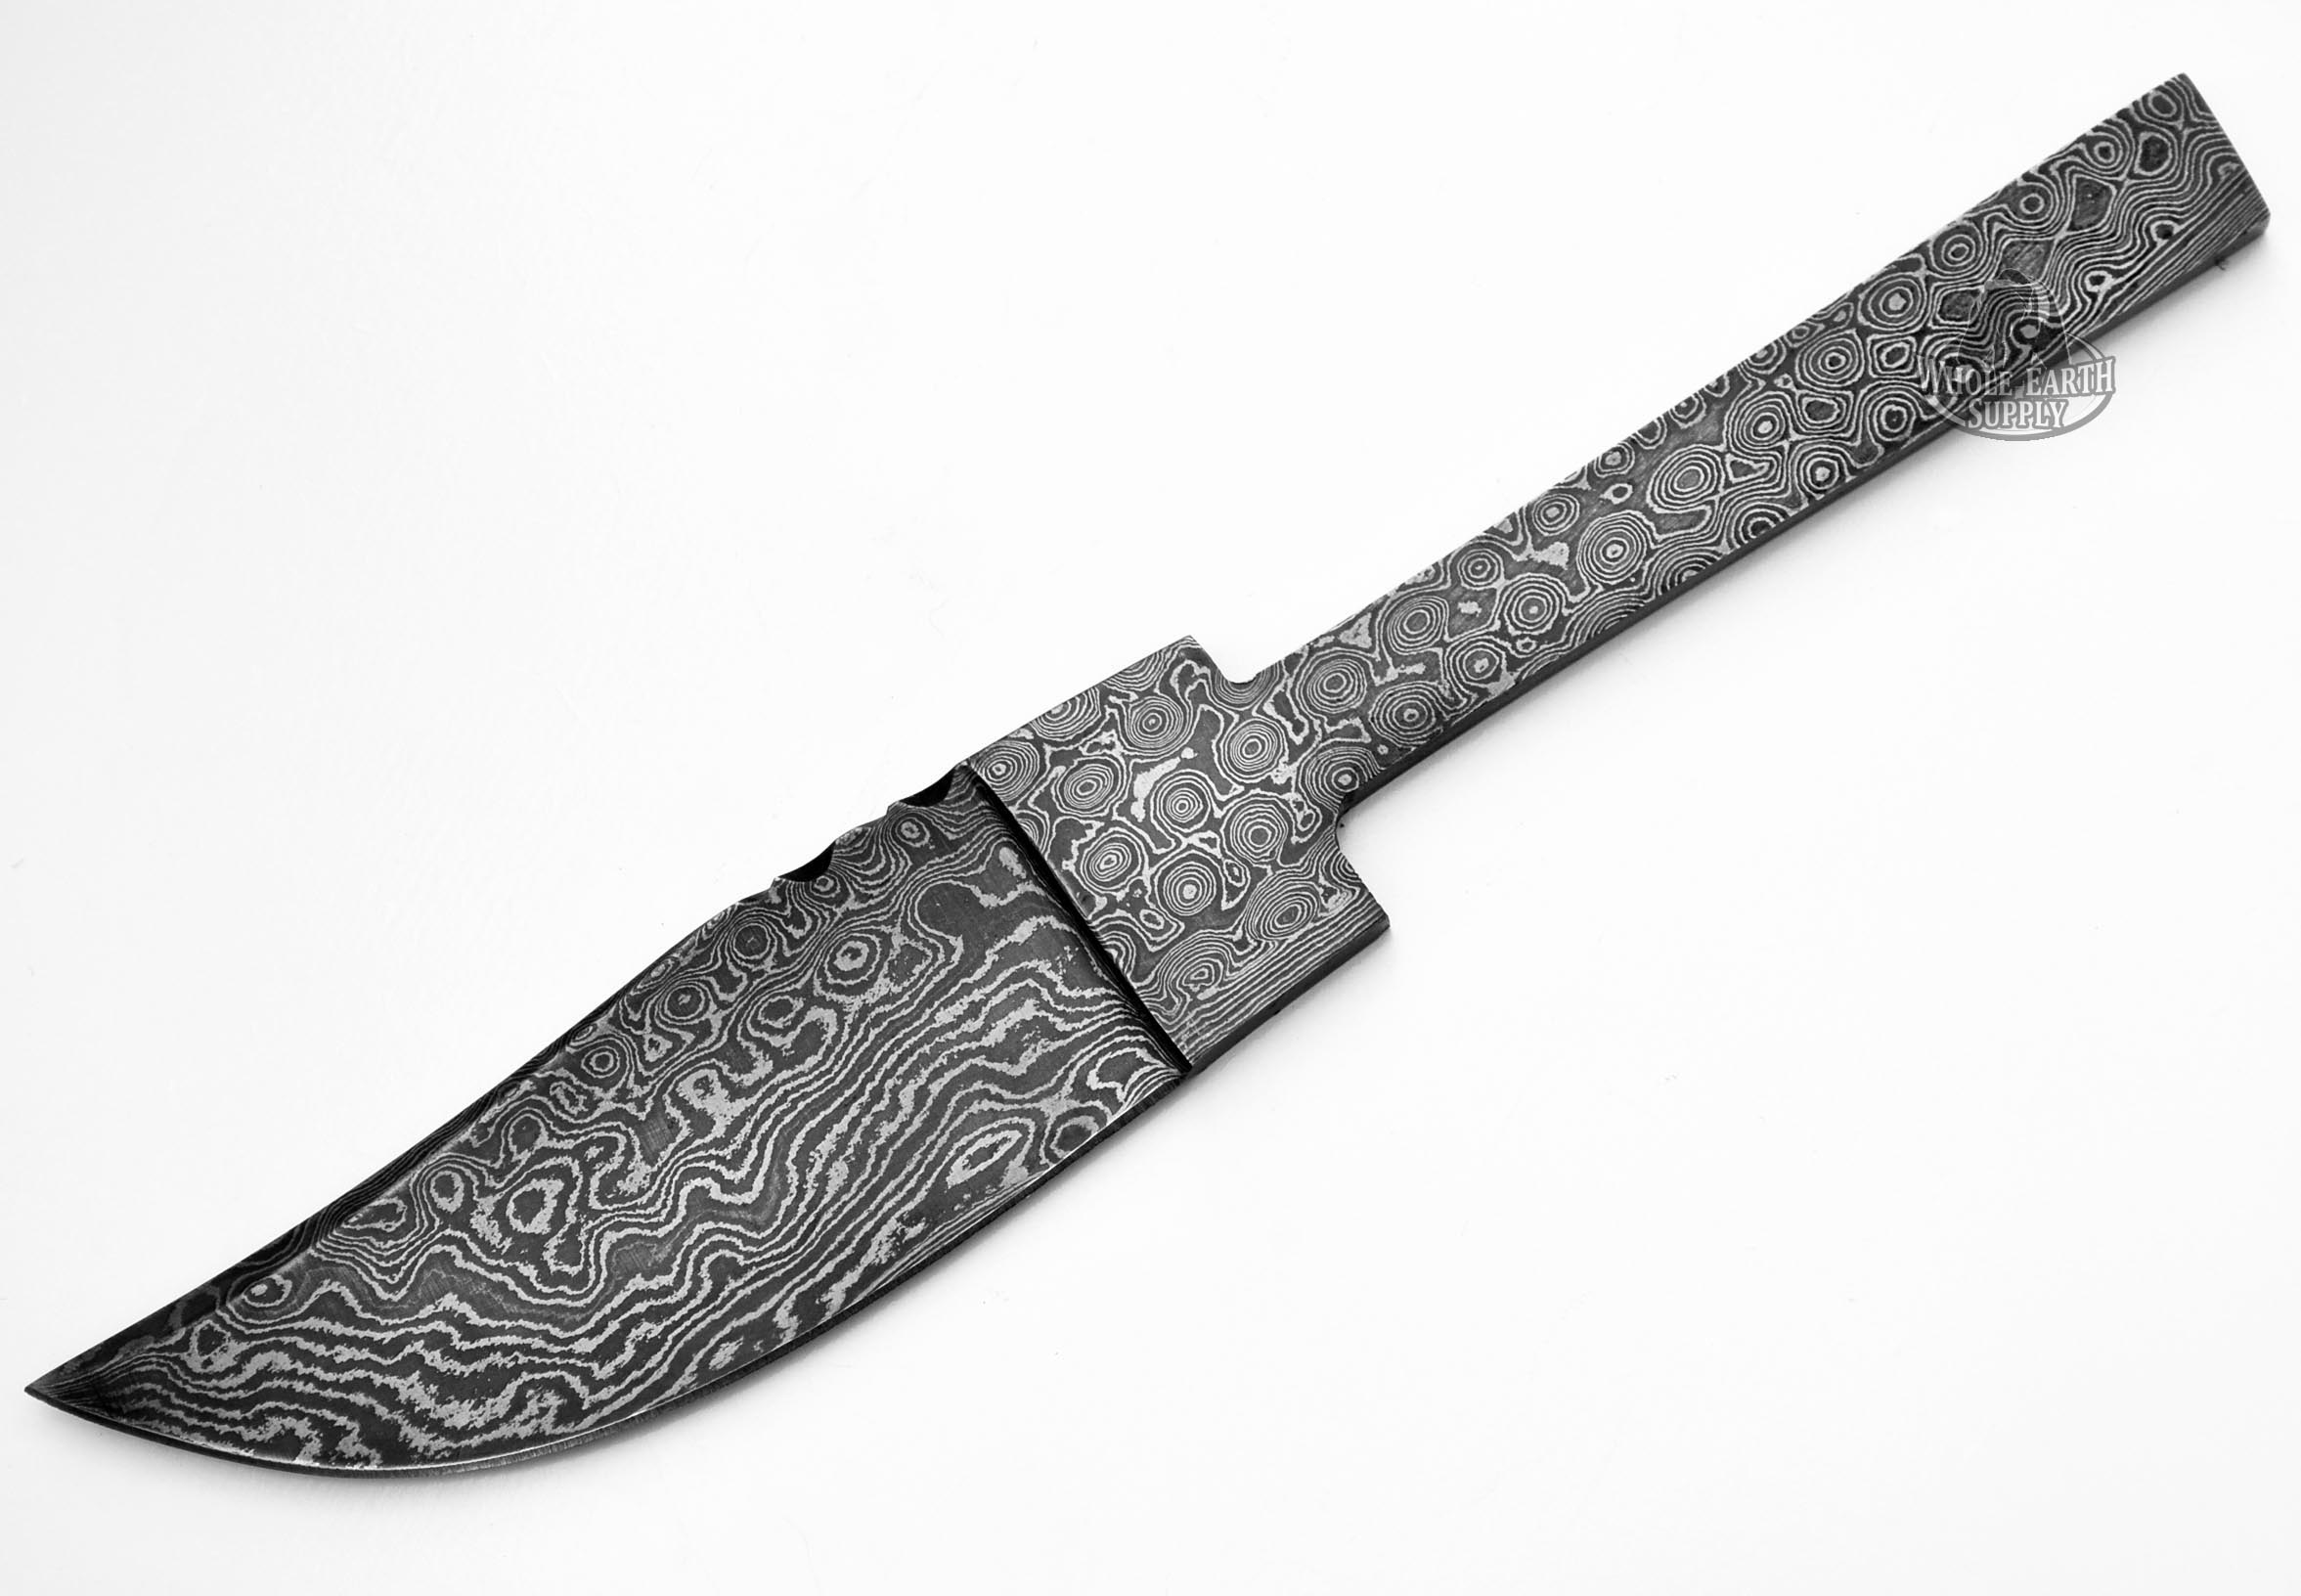 Partial Tang Wide Skinner Damascus Blank Blanks Blade Knife Knives Making High Carbon Steel